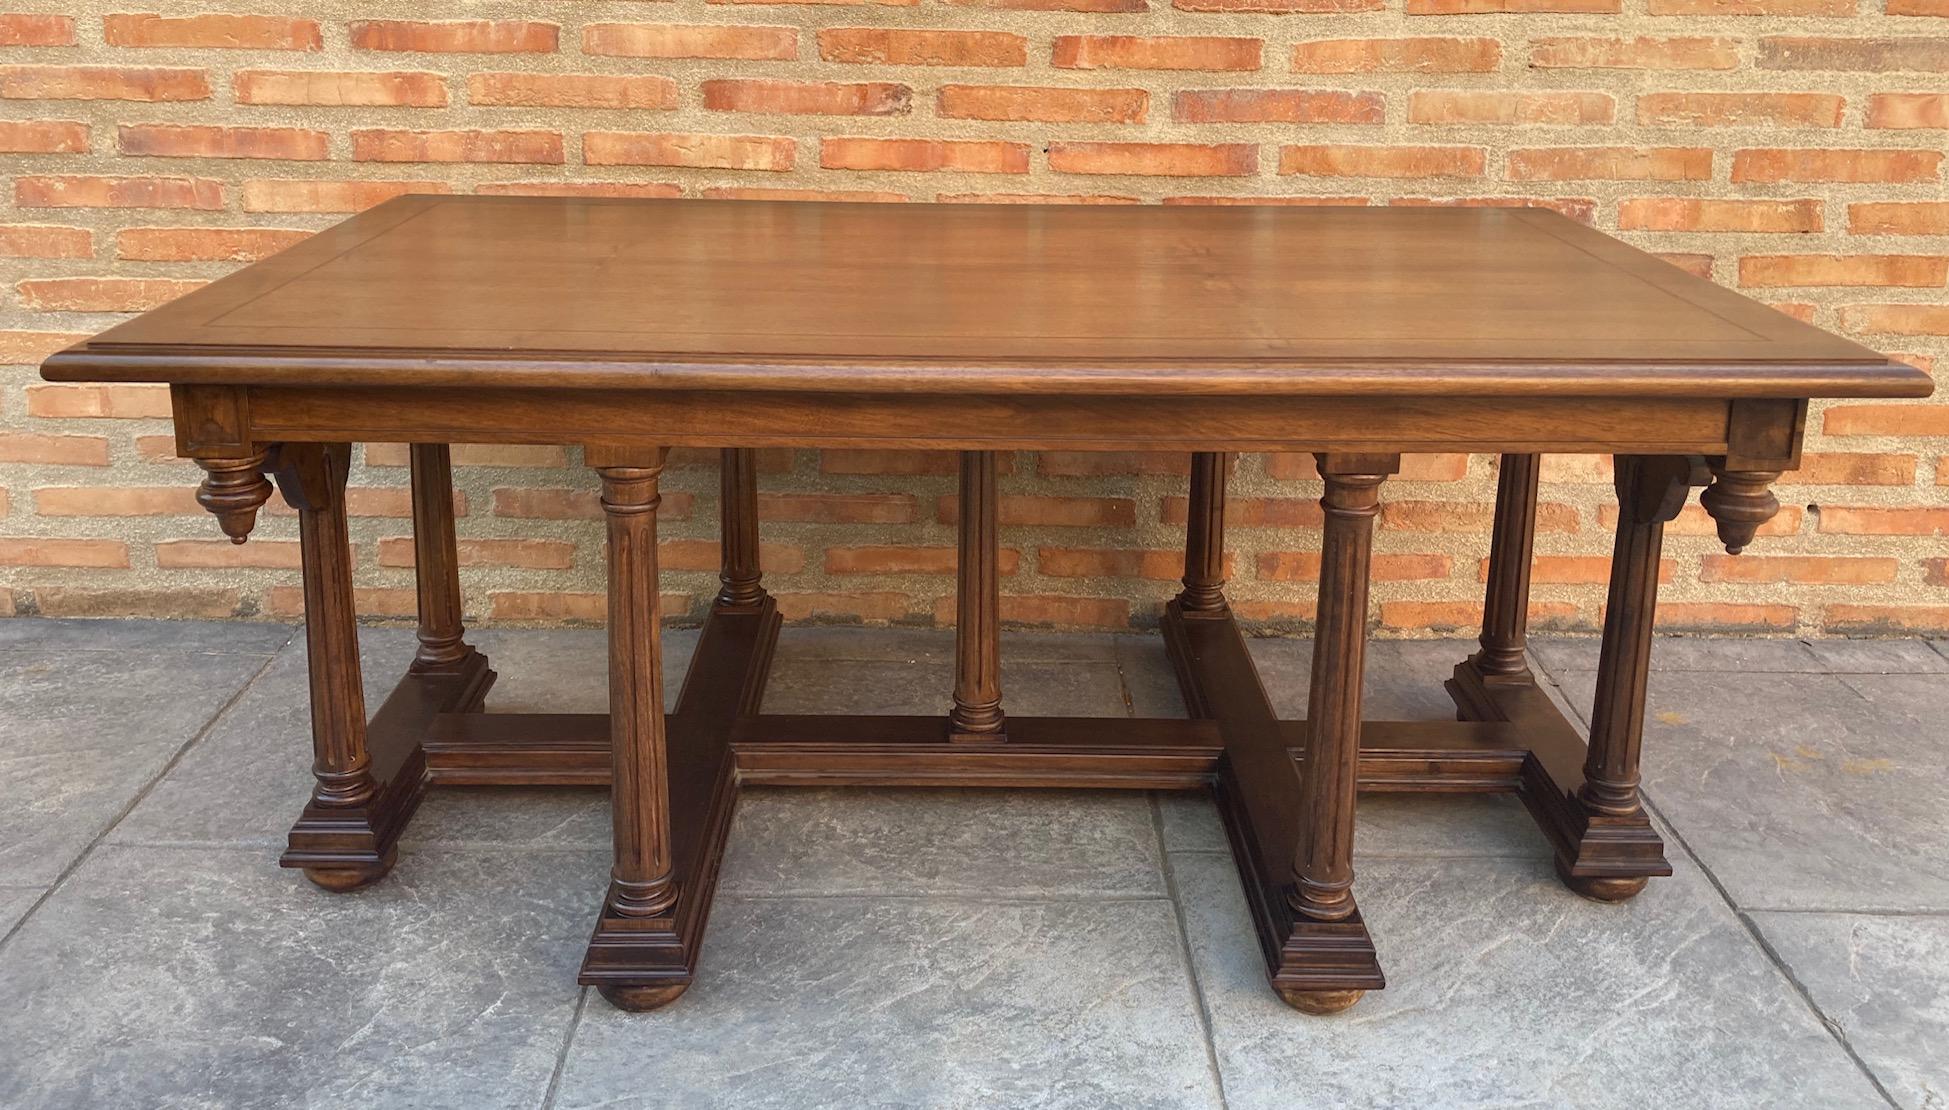 Spanish church table or altar from the 19th century with wooden columns and top with a fine line of hand carved marquetry.

An unusual shape with a nice shiny patina. Good size for a coffee or side table. Funny carved stands with a profiled edge